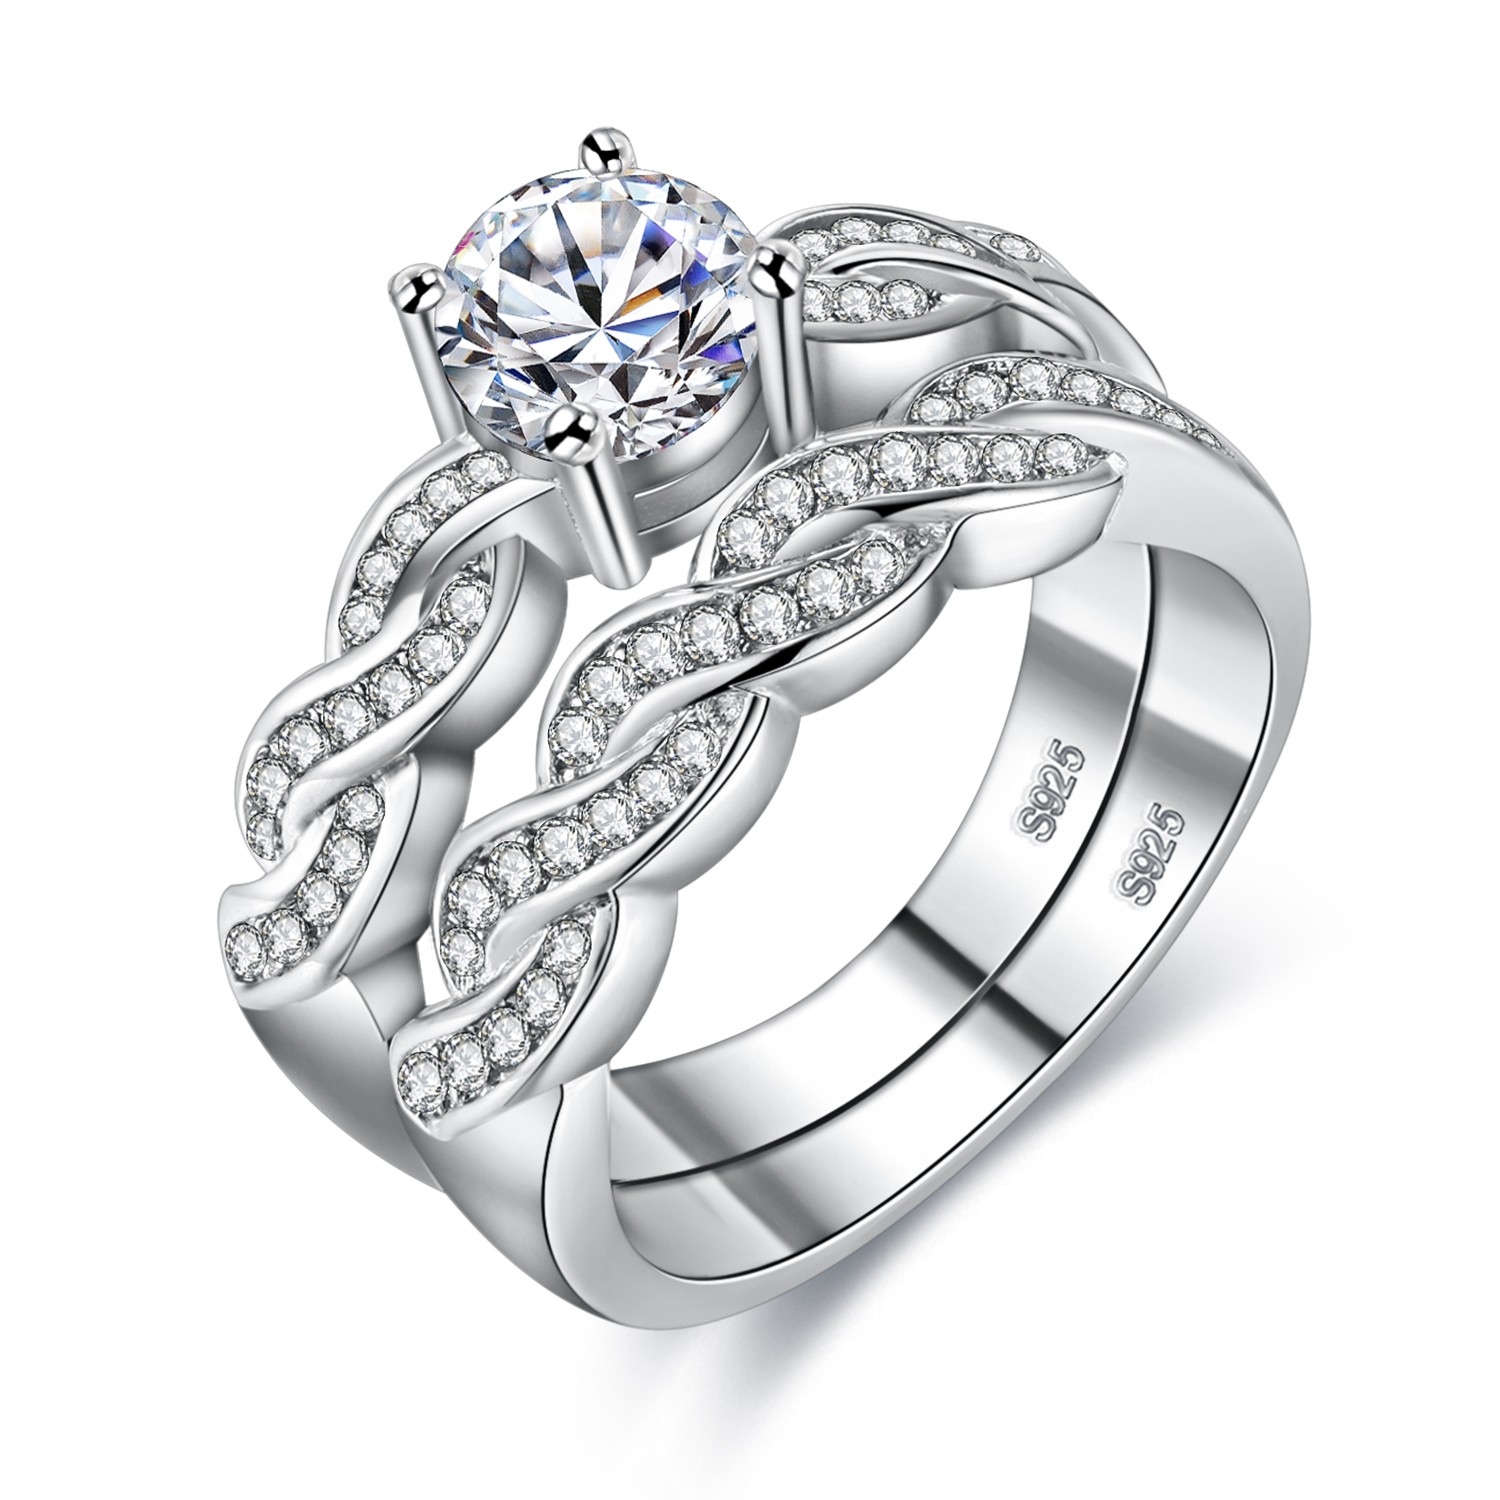 S925 Silver Lucky Love Engagement Wedding Ring